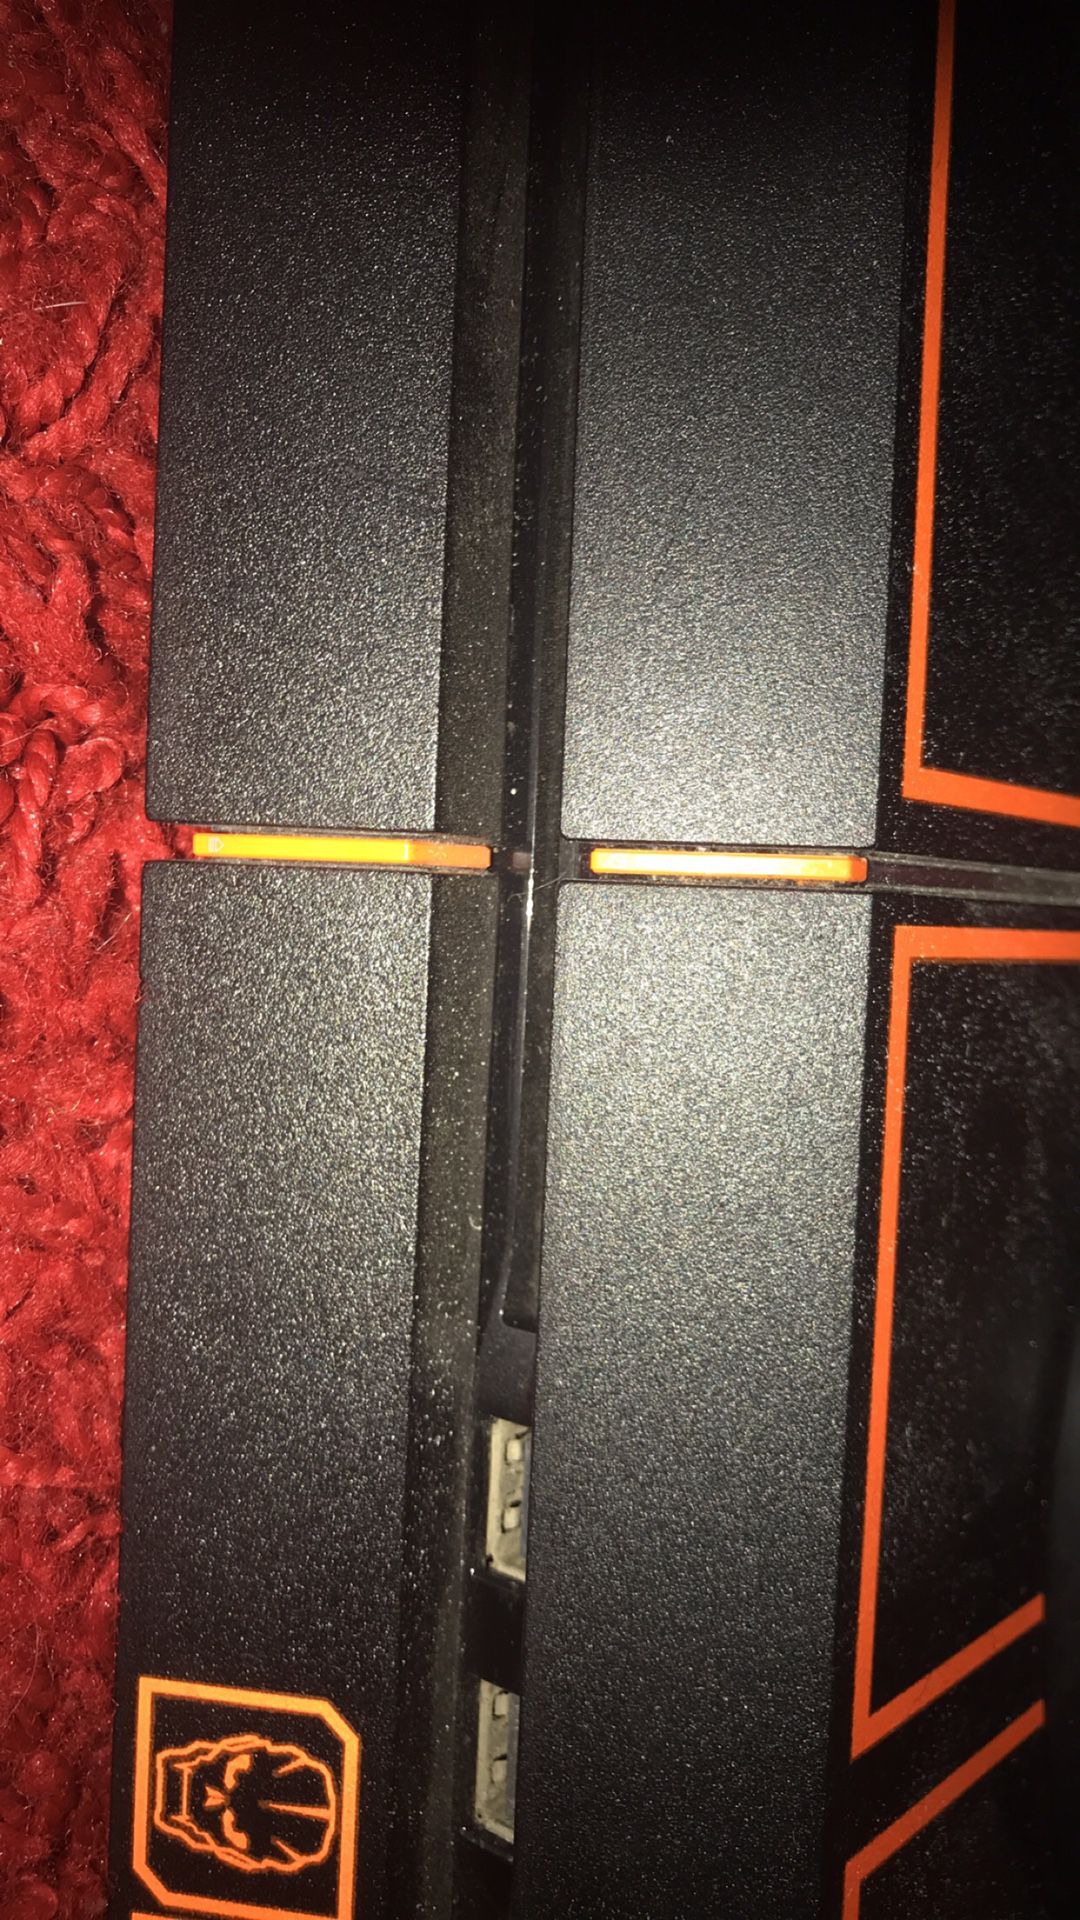 ps4 console black ops 3 edition